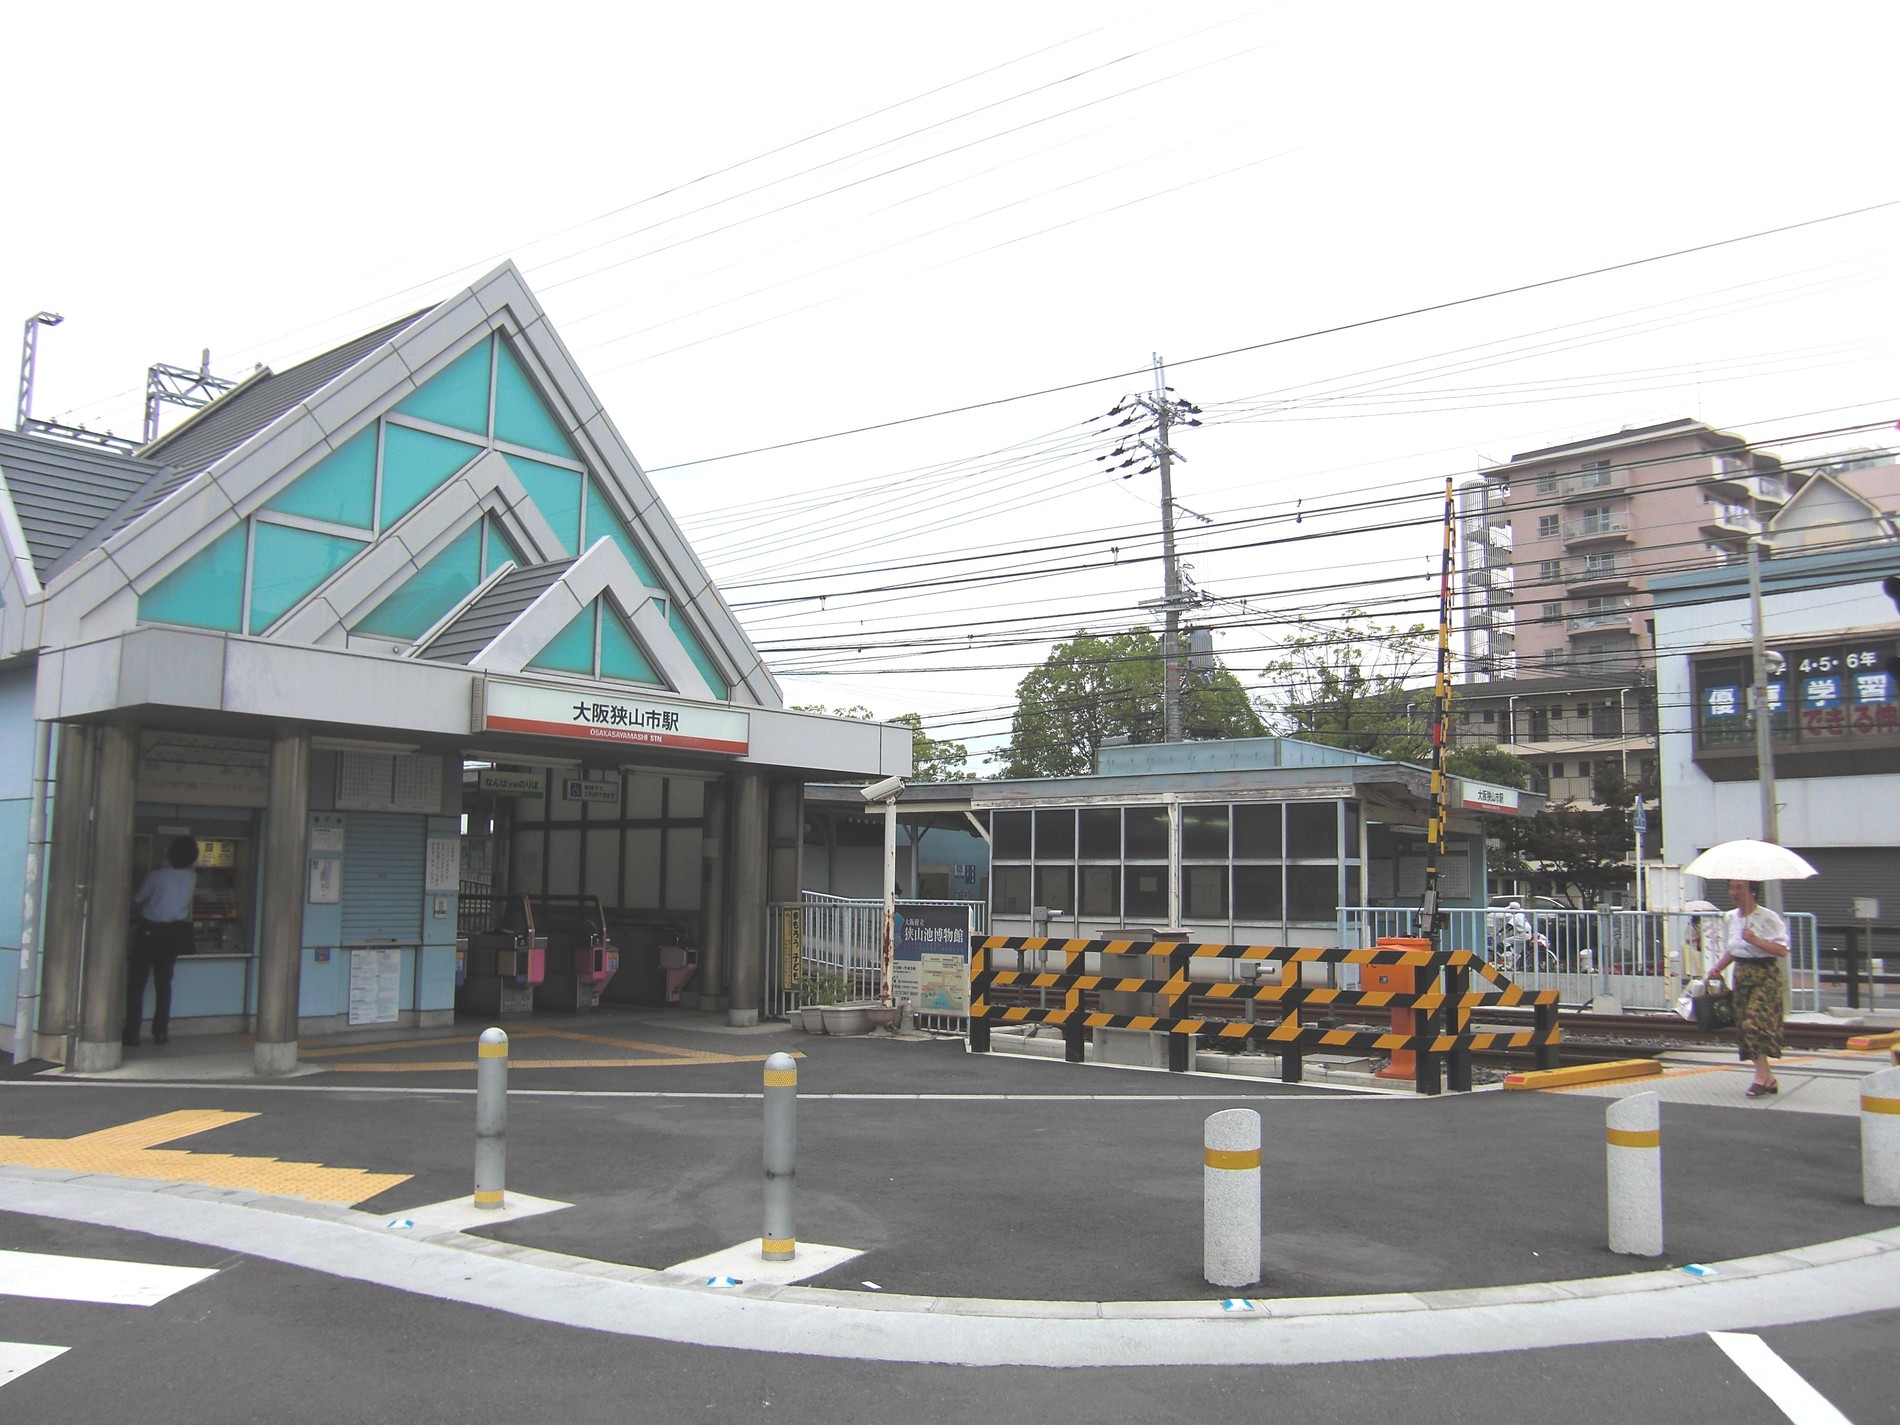 Other Environmental Photo. 780m interval express station until the Nankai Koya Line "Osakasayama" station. About 3 minutes by bicycle, Closeness of a 10-minute walk